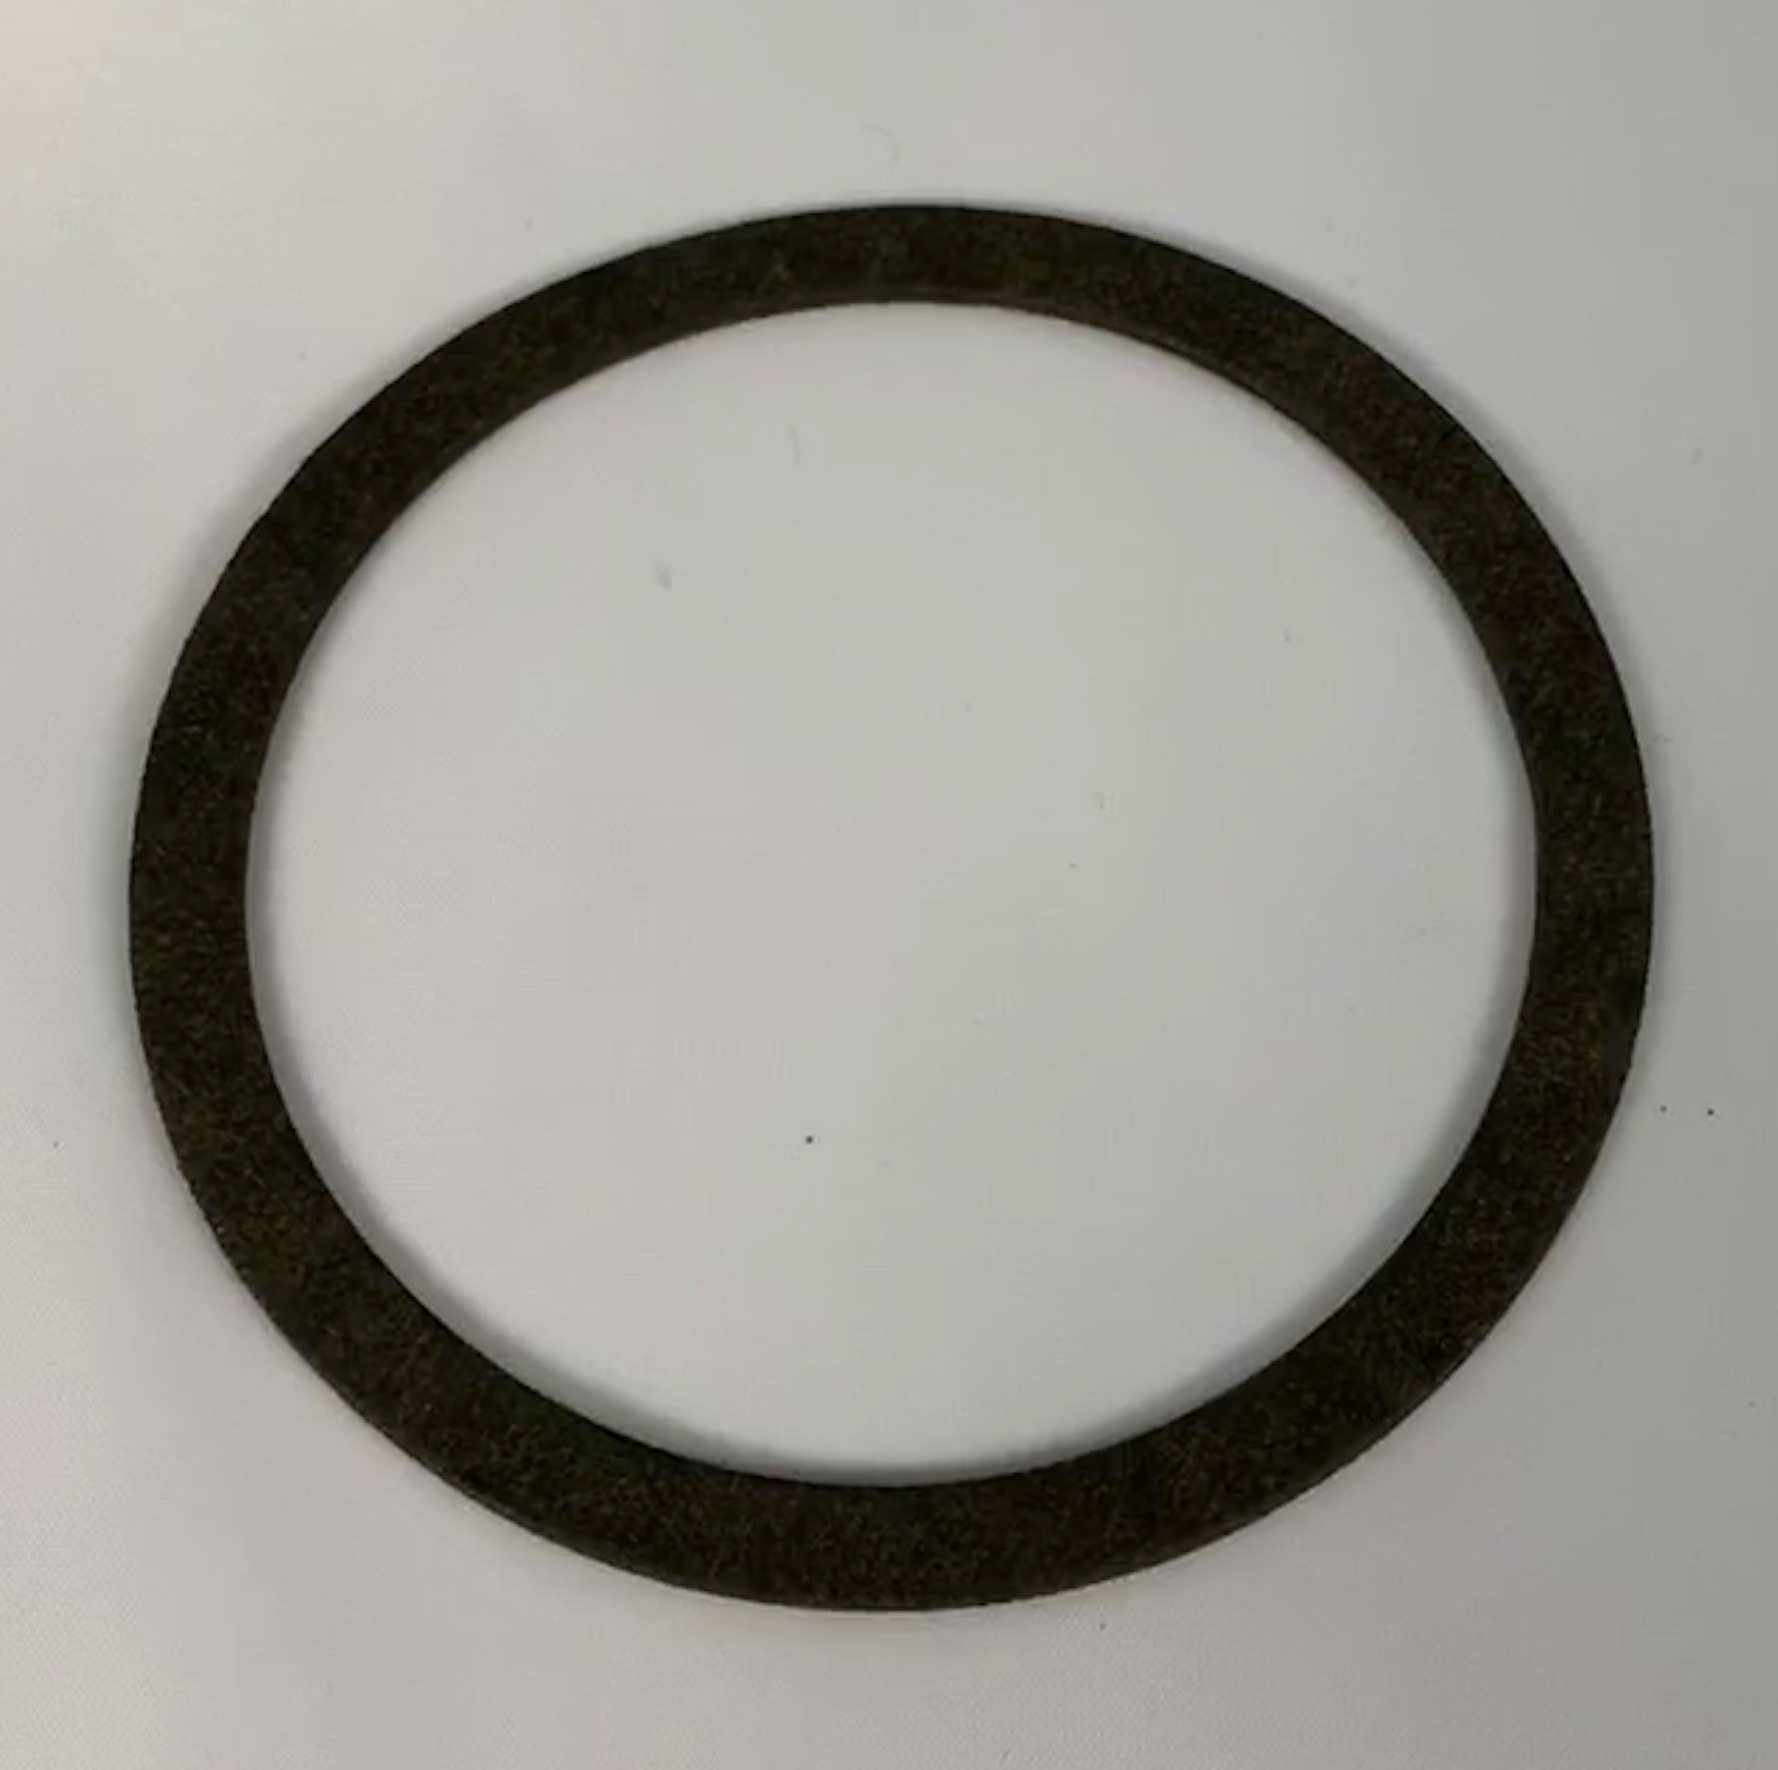 Sealcom 0600-00871-0KT O-Ring Kit Replacement For Cornell BME 178A-A00 